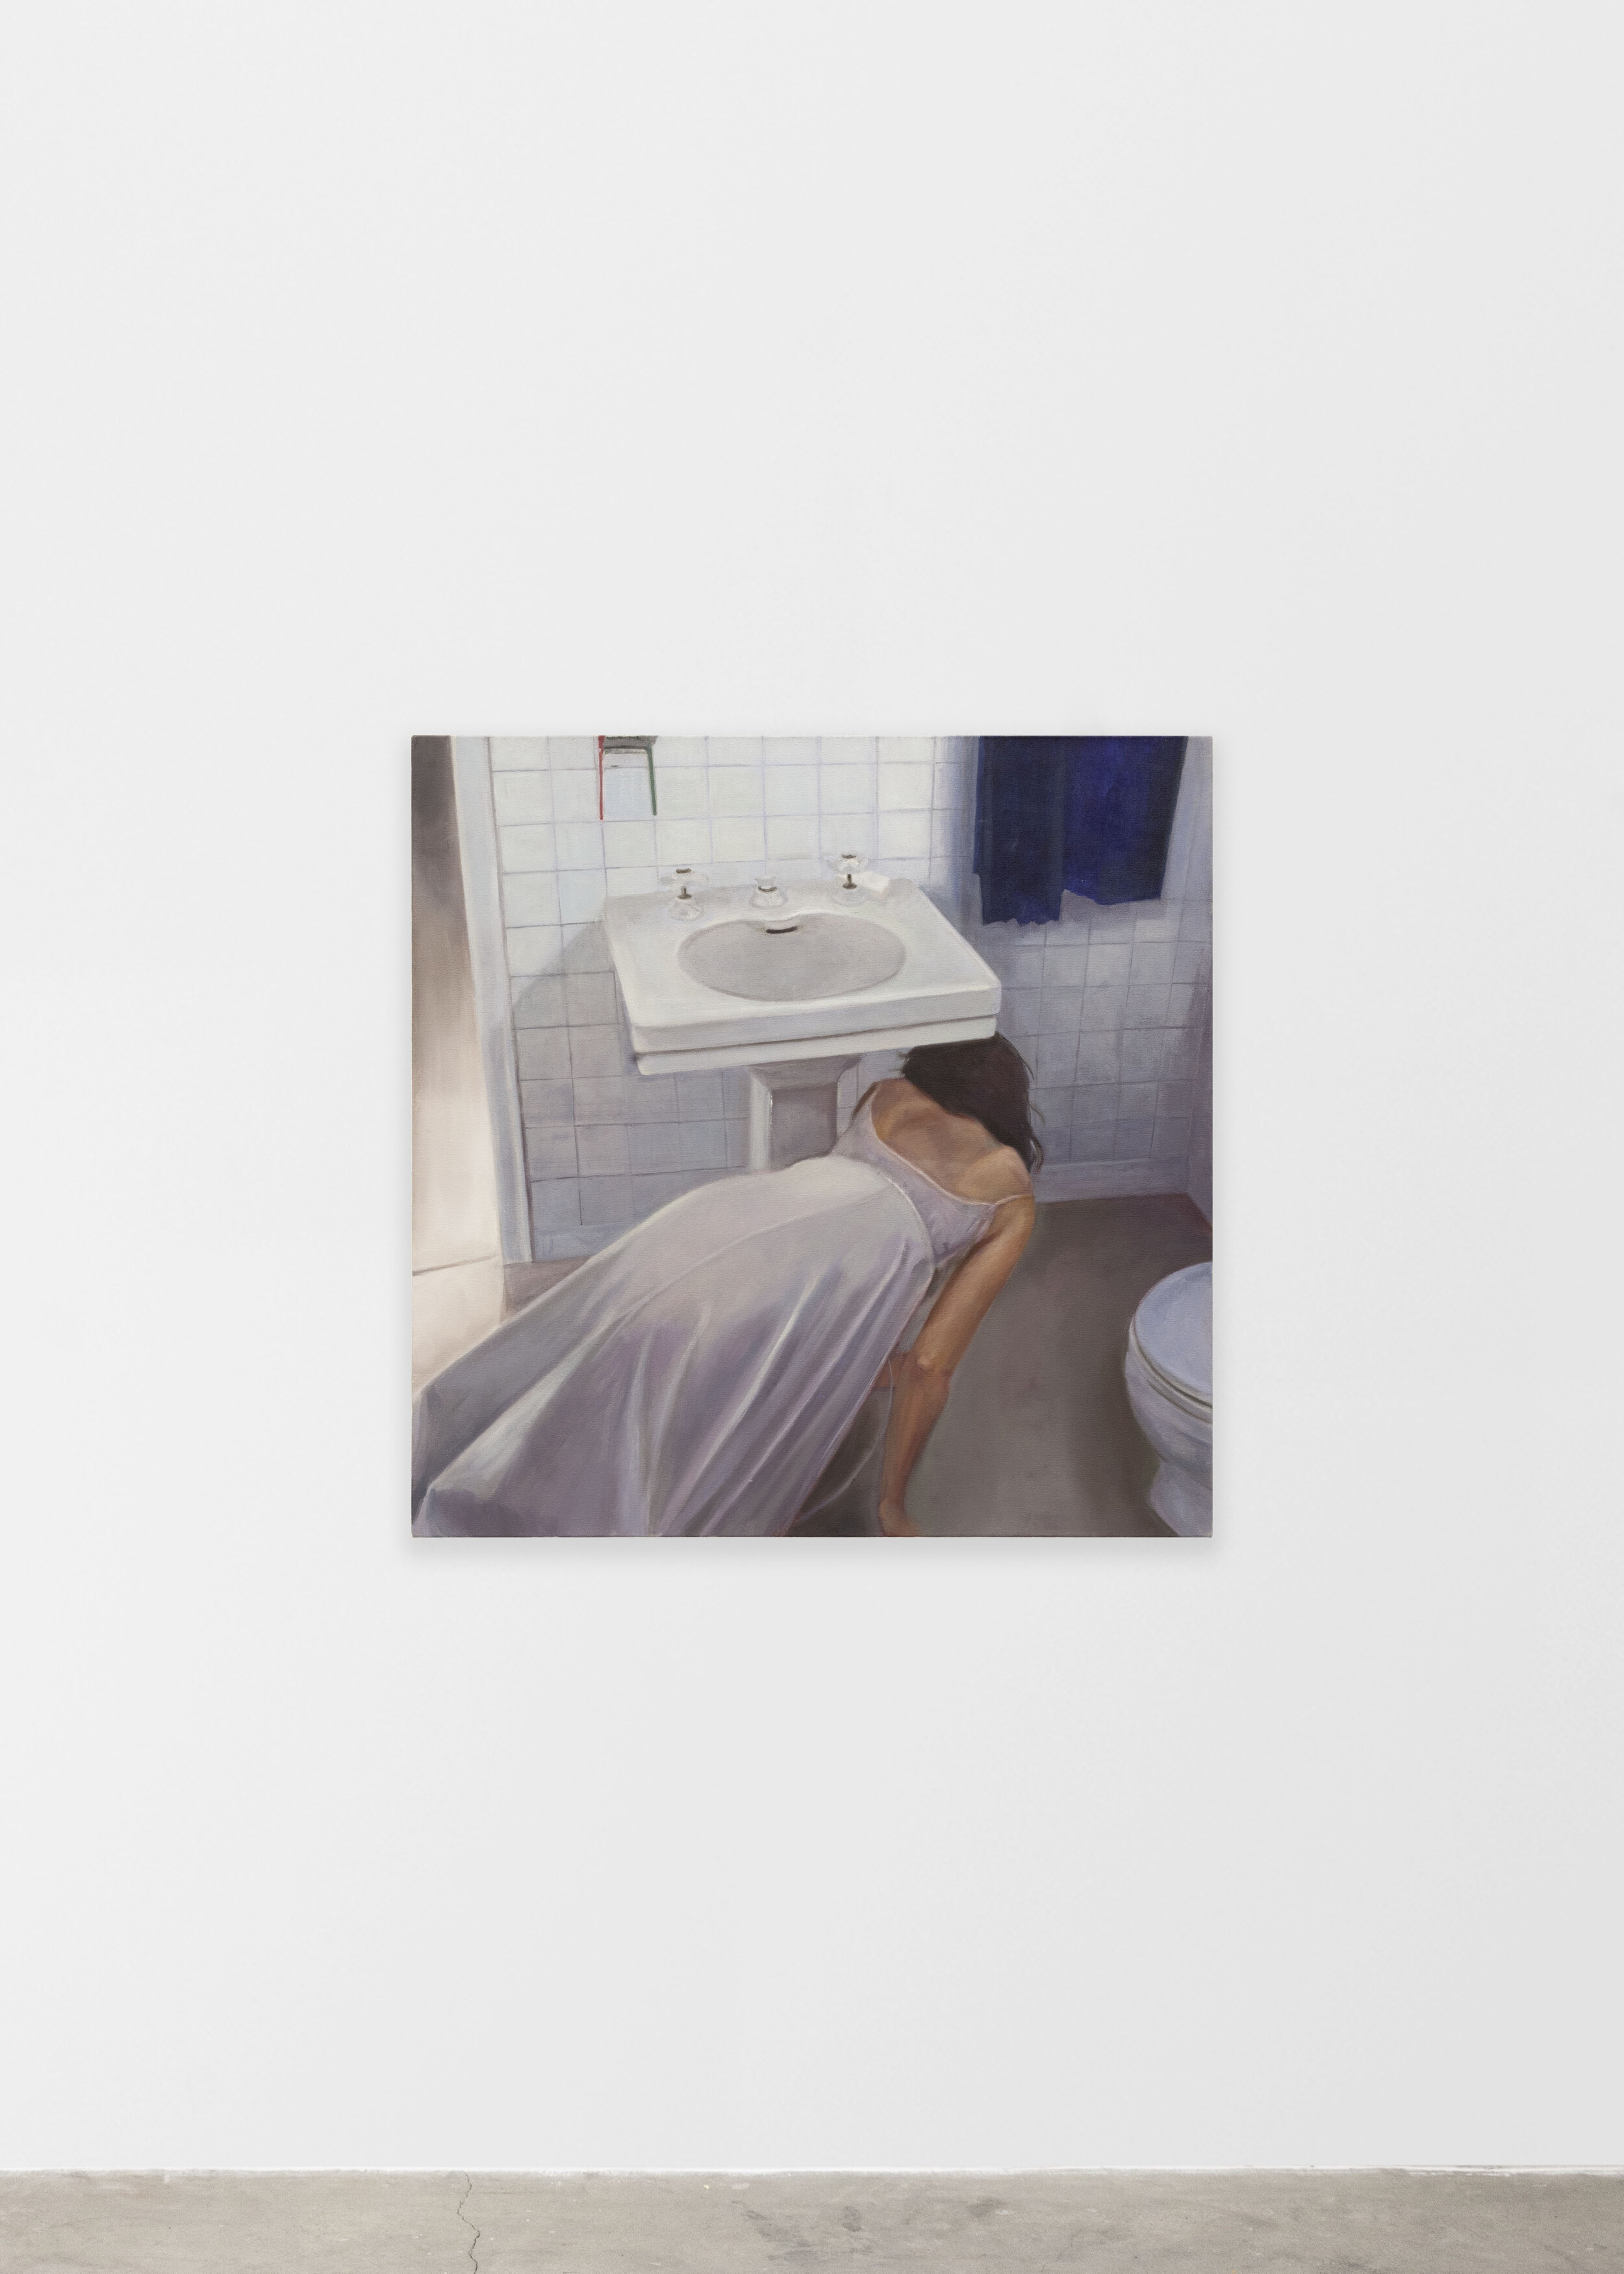  Shannon Cartier Lucy,  Woman Under The Sink , 2019, oil on canvas, 32 x 32 in. 